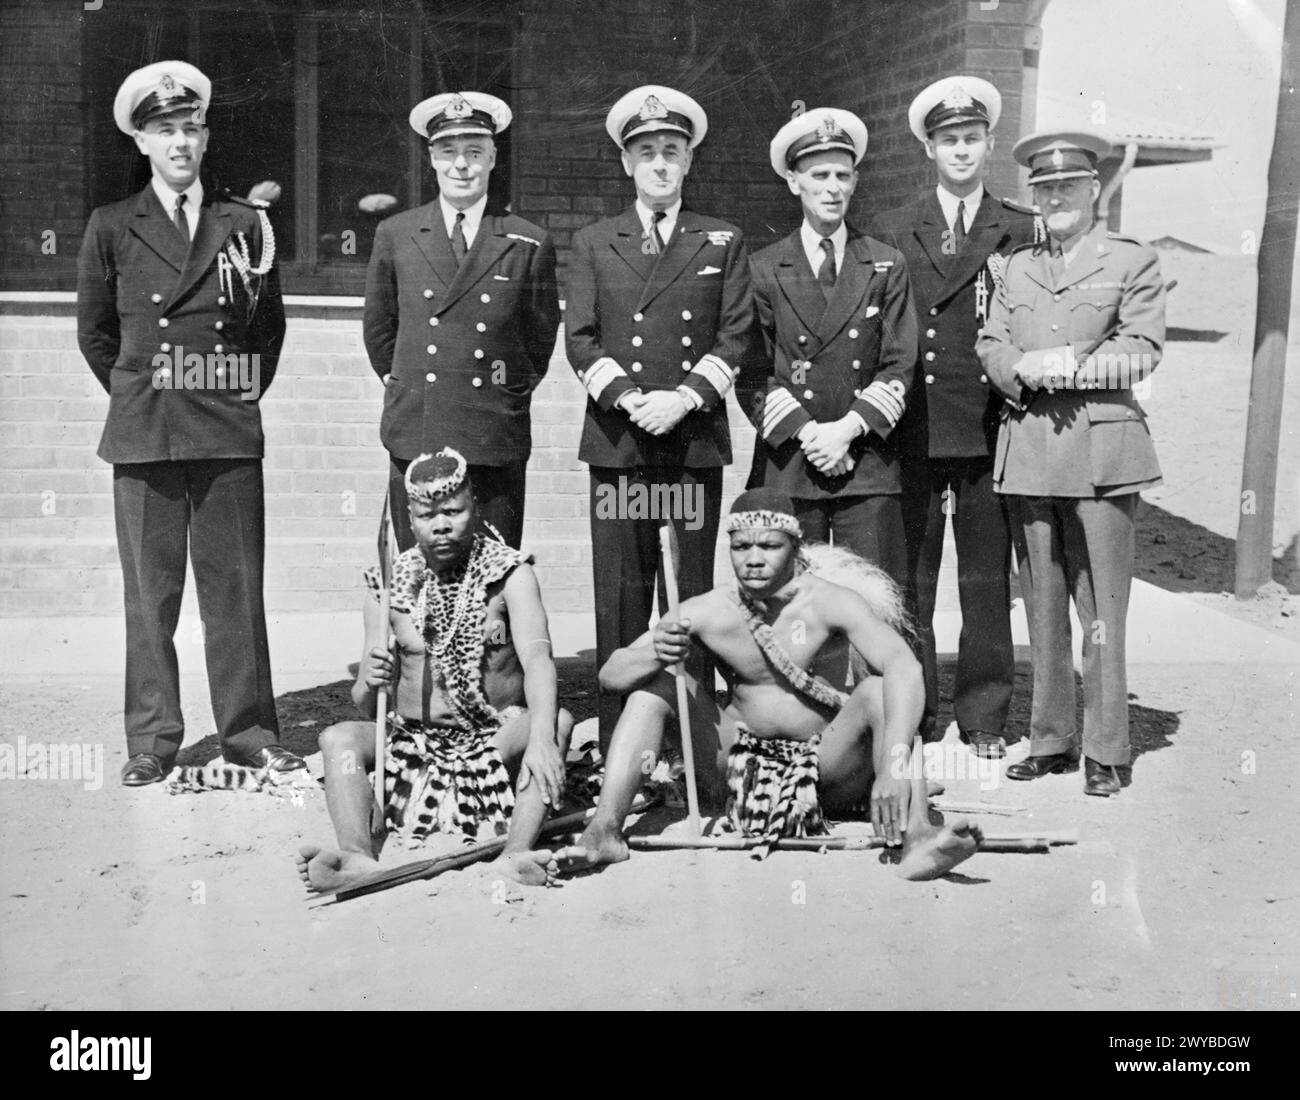 ZULU PRESENTATION TO HMS ASSEGAI. 21 SEPTEMBER 1943, ZULU'S PARADISE, POCO POCO LAND. THE PRESENTATION BY ZULU CHIEFTAINS TO HMS ASSEGAI OF A ZULU SHIELD, ASSEGAIS (A SLENDER IRON TIPPED LANCE OR JAVELIN), A KNOBKERRIE AND OTHER WEAPONS. THE PRESENTATION WAS MADE TO REAR ADMIRAL R J R SCOTT, AM, AND INCLUDED AN ILLUMINATED ADDRESS IN ZULU. - The Zulu Chiefs and their gifts with, (left to right) Paymaster Lieutenant Commander D C Woolf, RN, Commander K W Stewart, RN, Rear Admiral R J R Scott, AM, Captain B E Adams, DSO, RN, Sub Lieutenant O W Dyers, SANF (V), Major A J Smart, Commandant South A Stock Photo